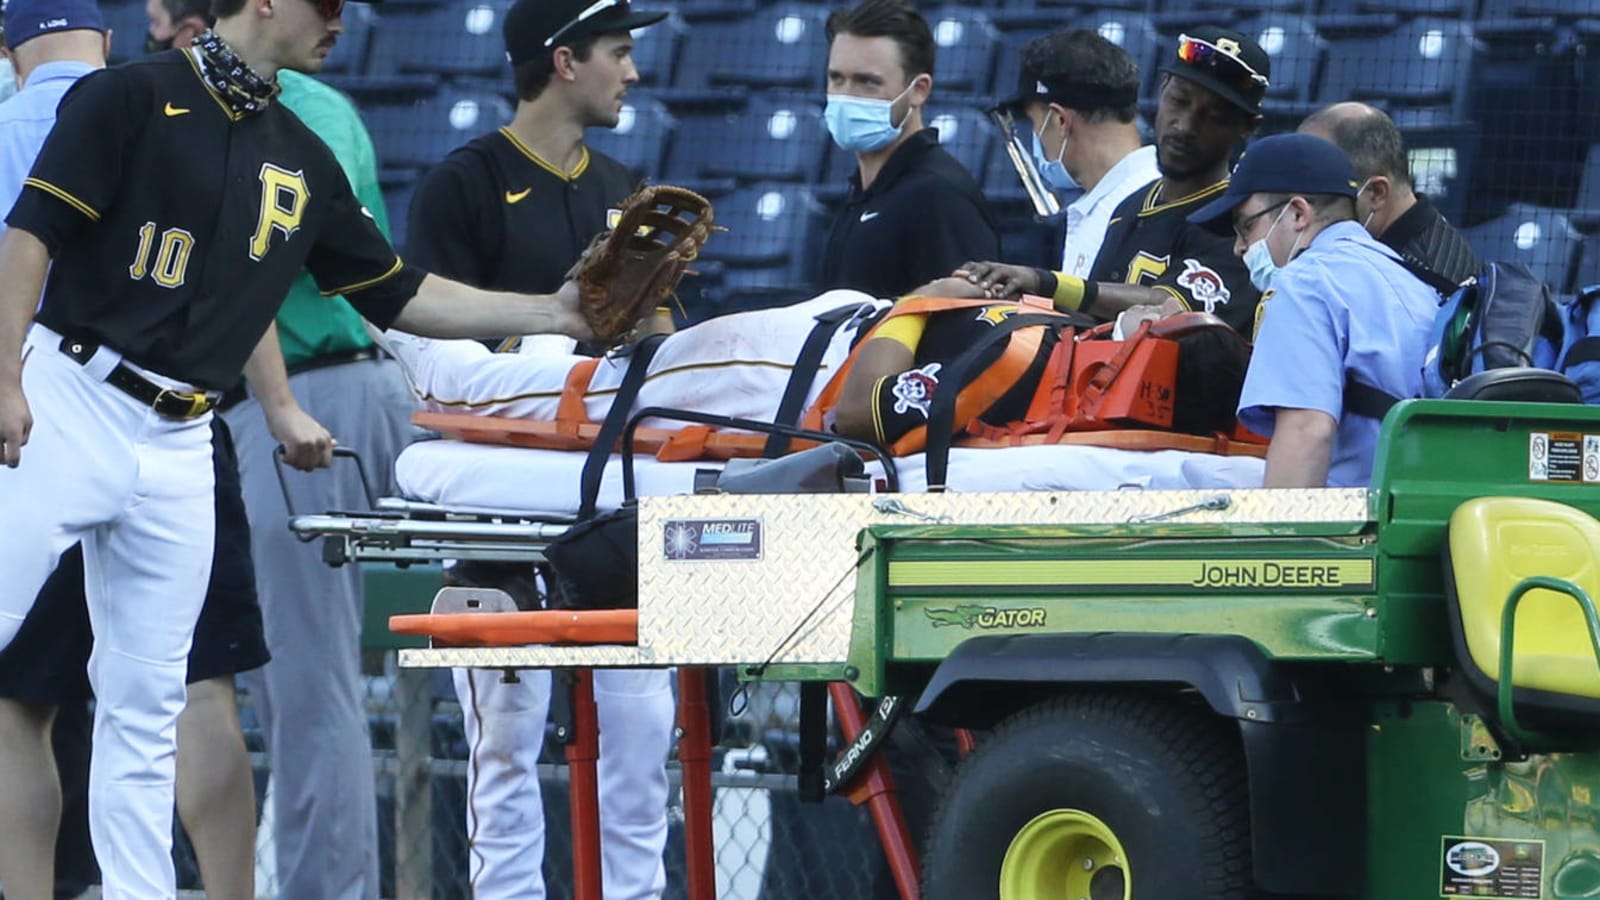 Report: Pirates IF Phillip Evans likely out for year after suffering broken jaw, concussion